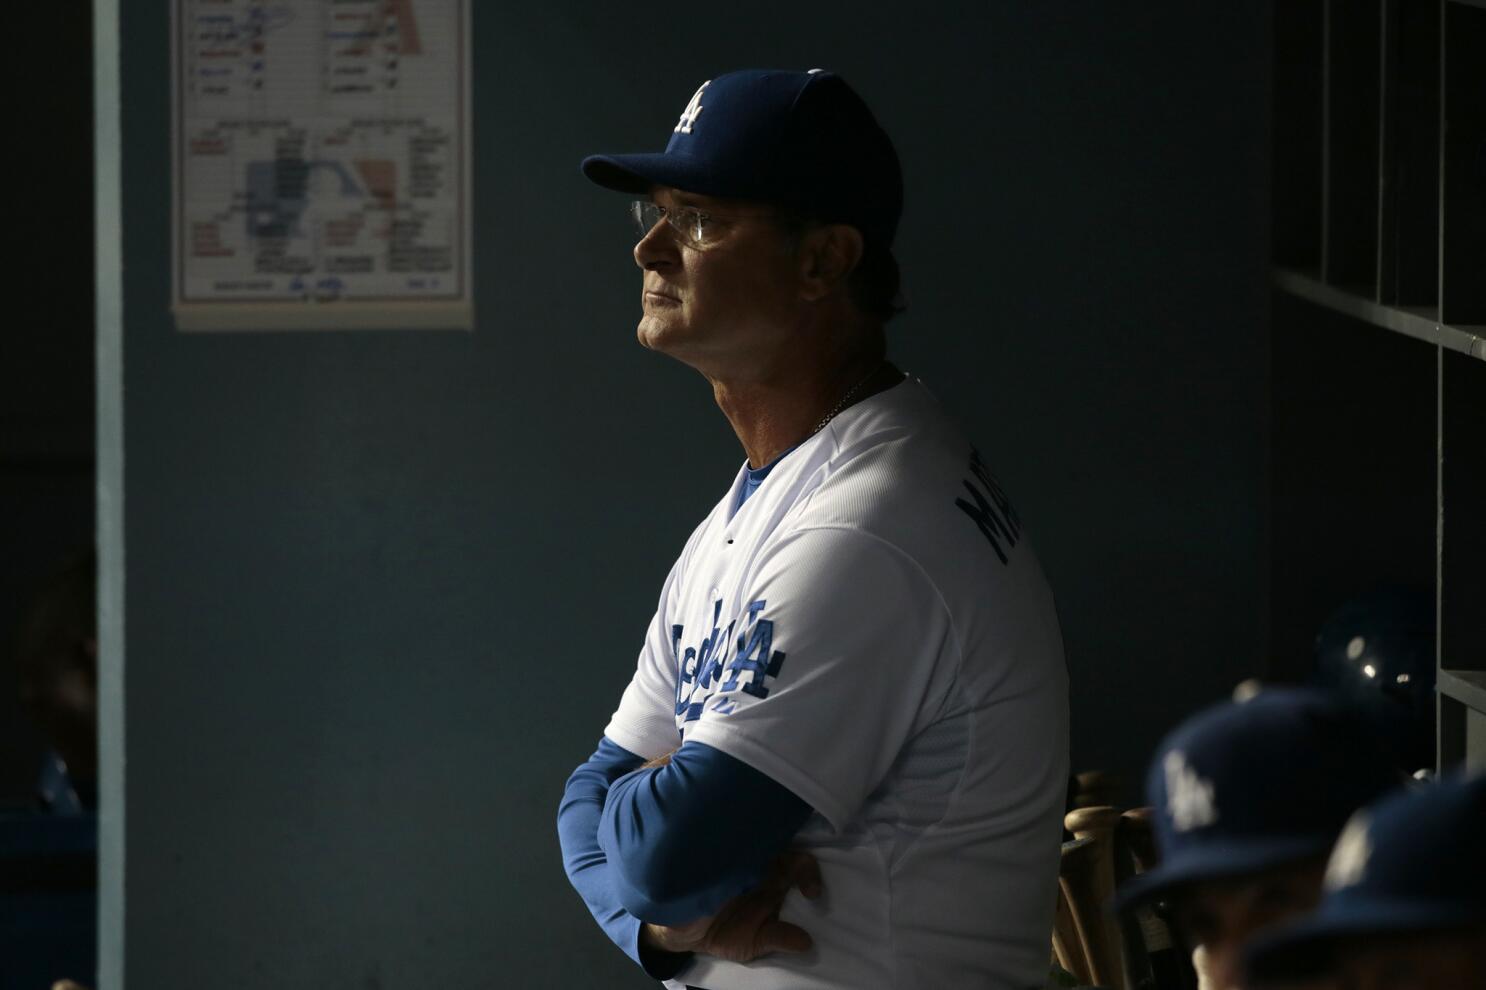 Photos: Dodgers and manager Don Mattingly part ways - Los Angeles Times